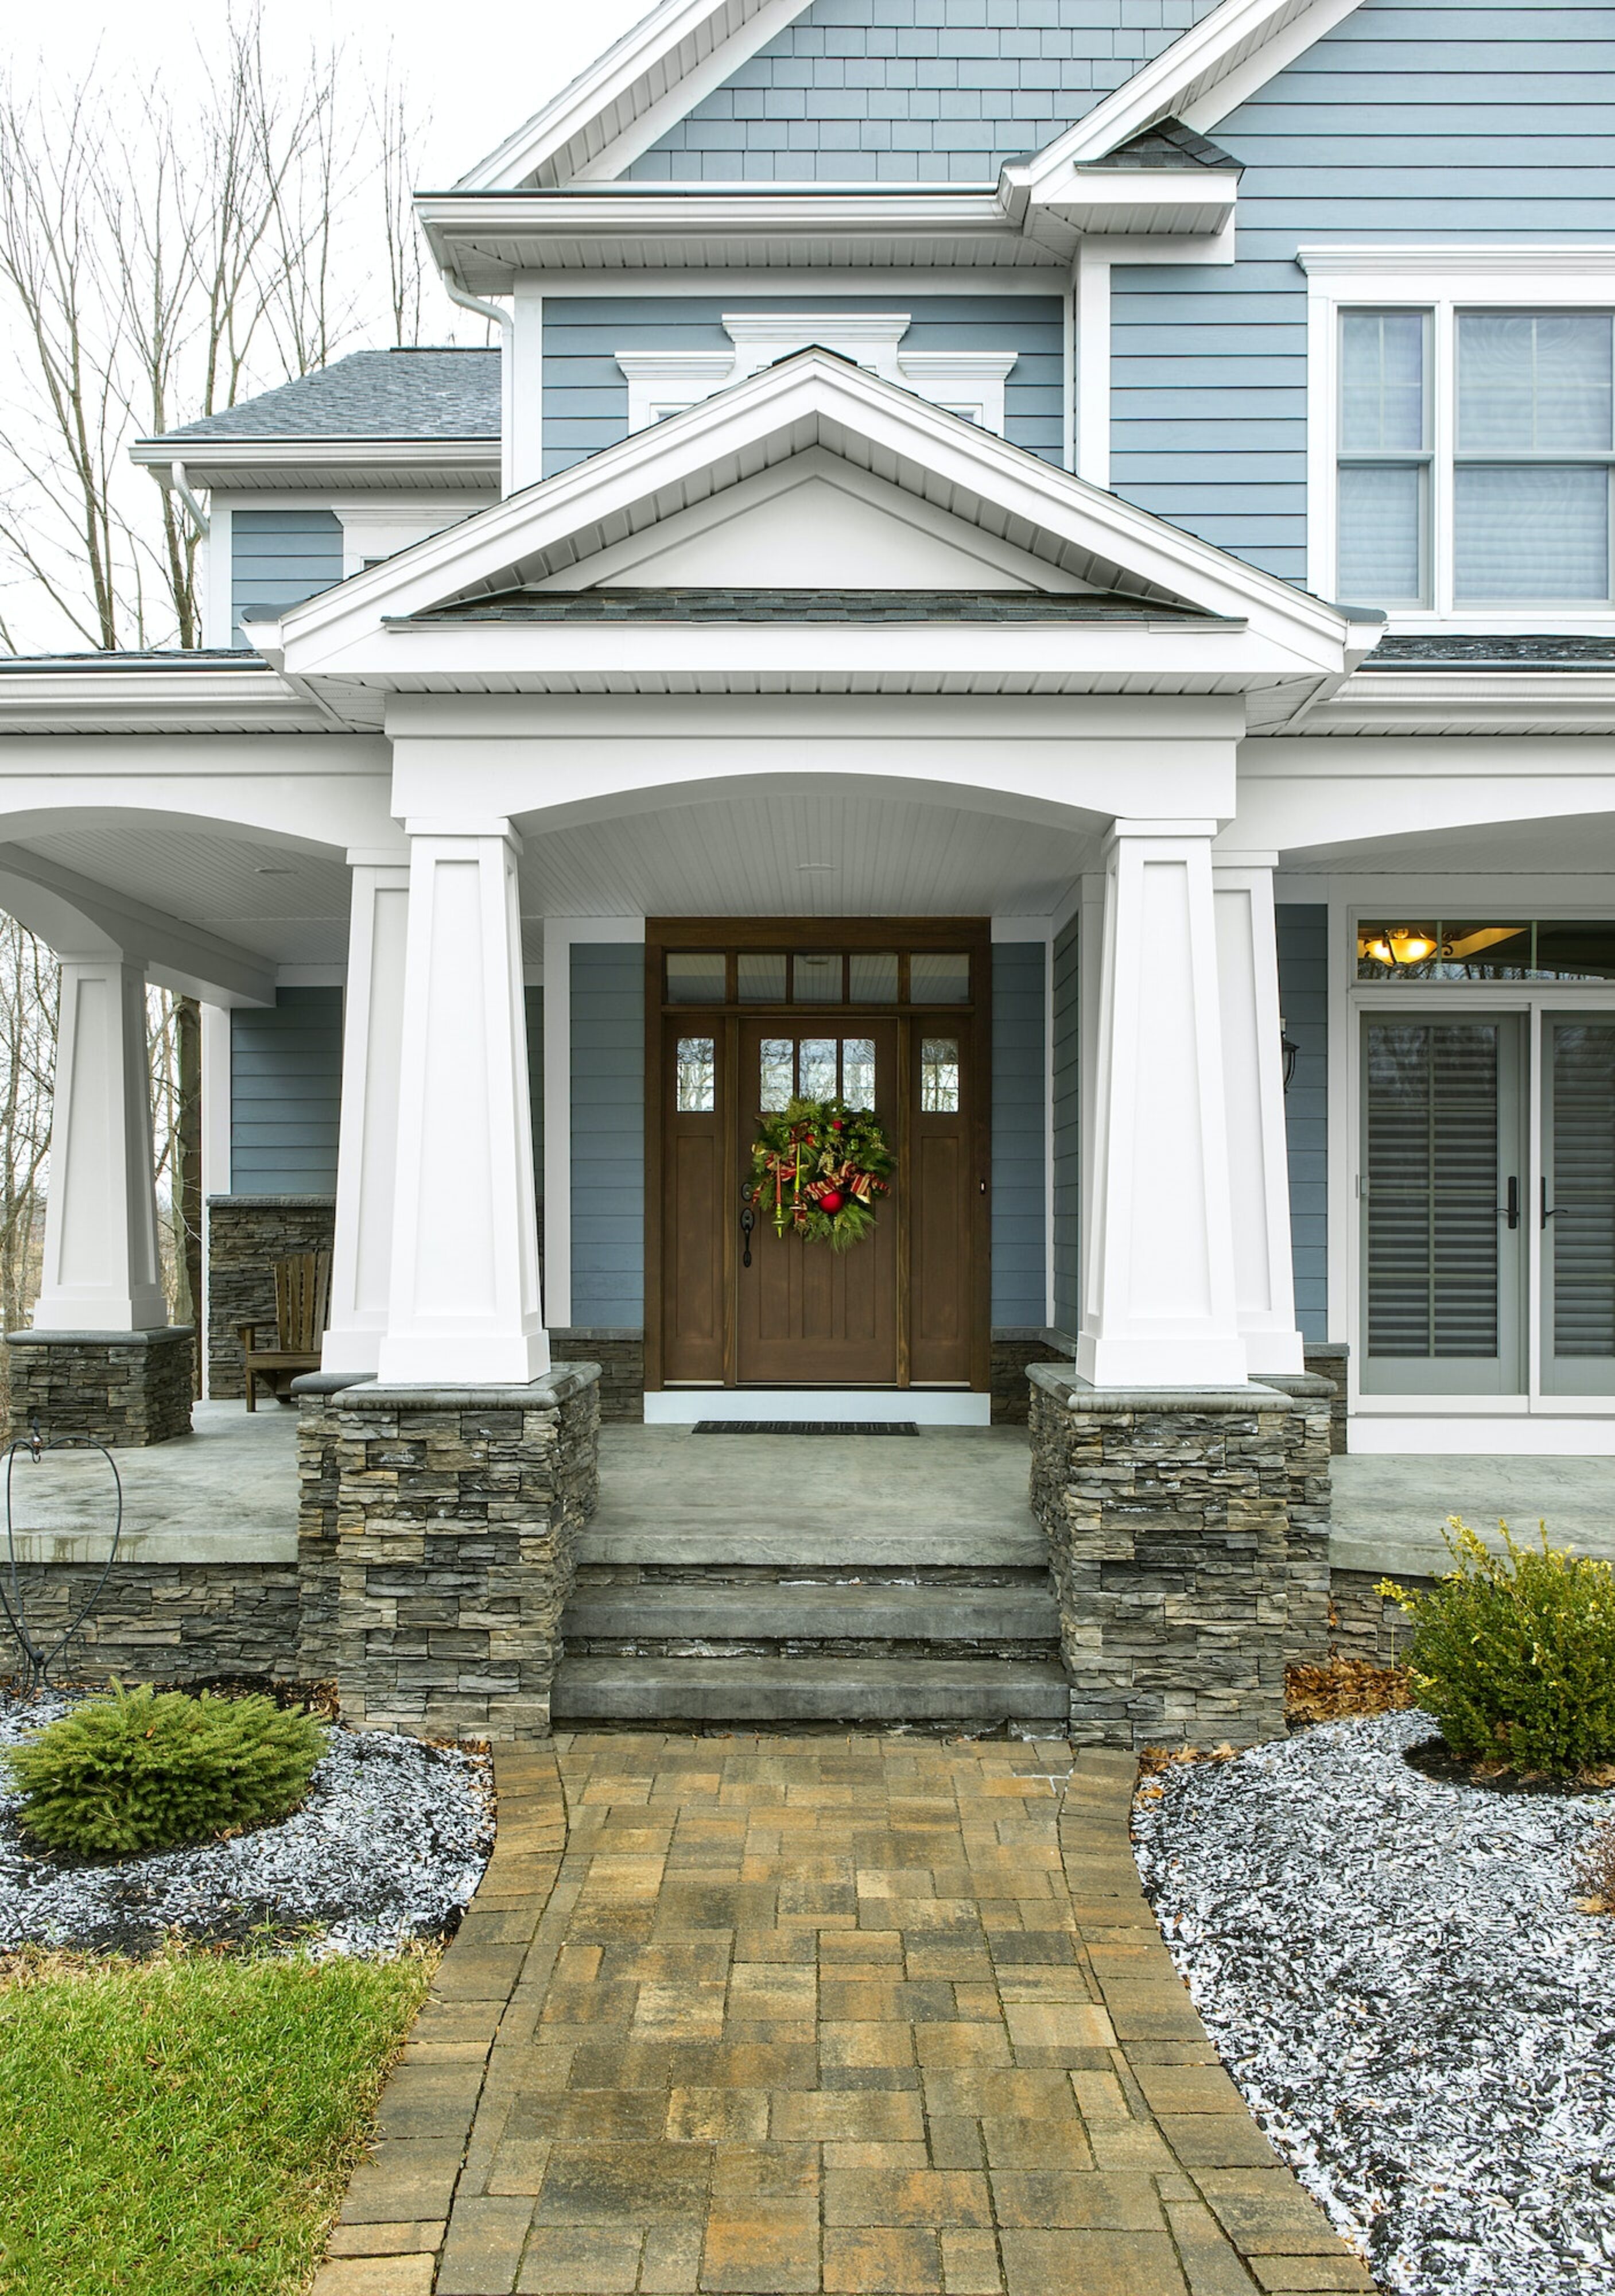 Updating your house number and replacing outdoor lighting are just some of the simple ways to boost your home's curb appeal.